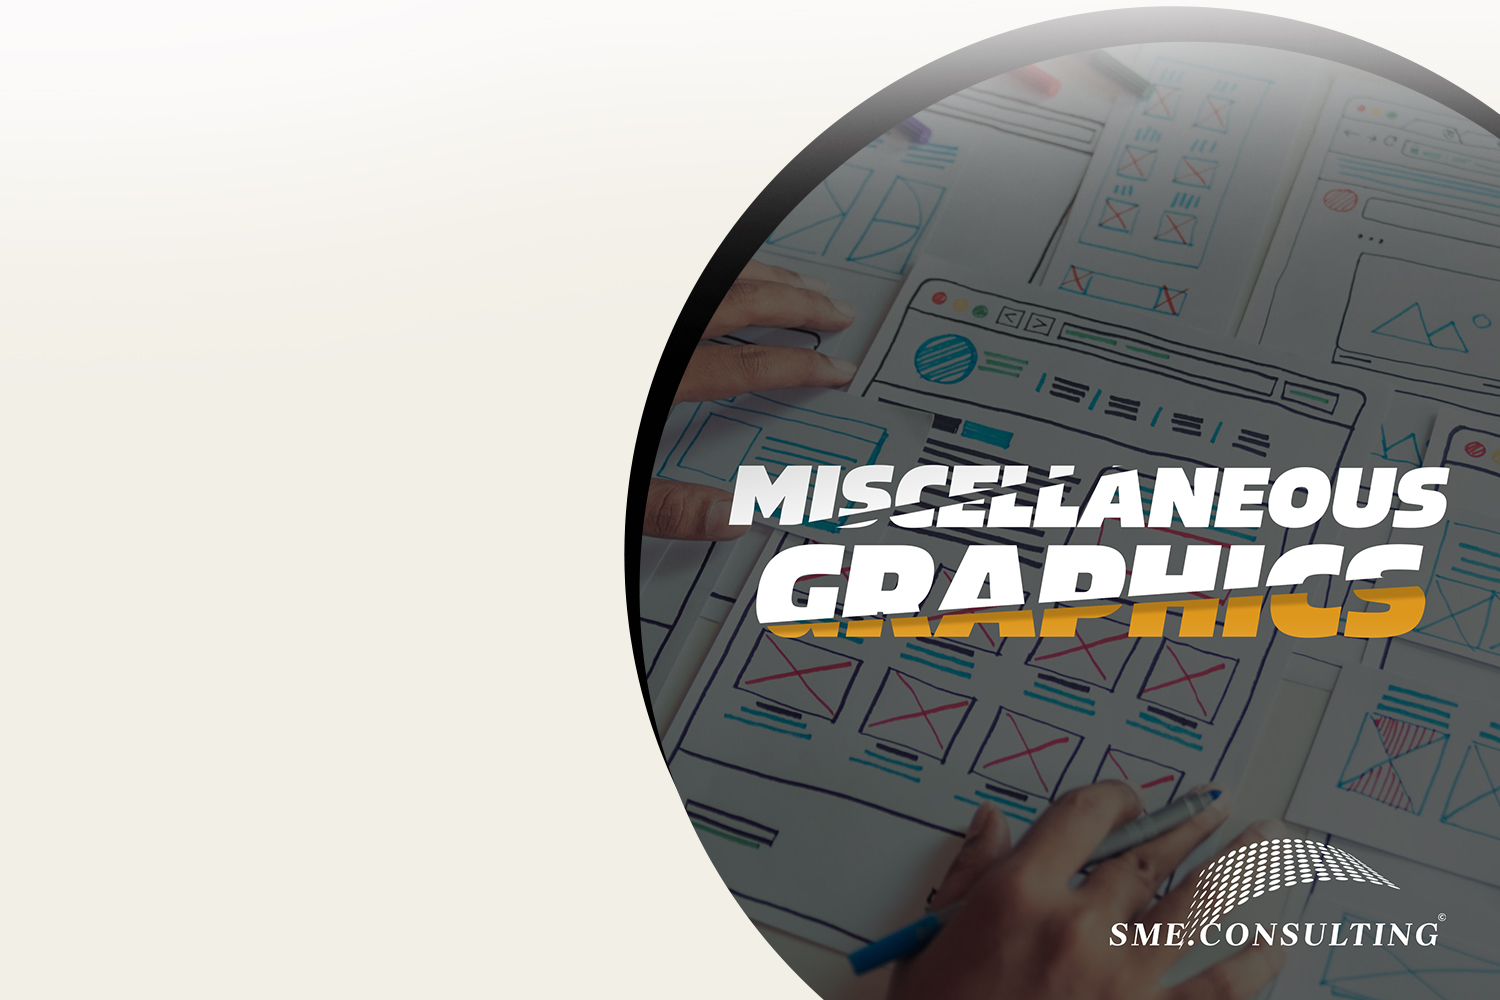 Miscellaneous Graphics - SME.Consulting